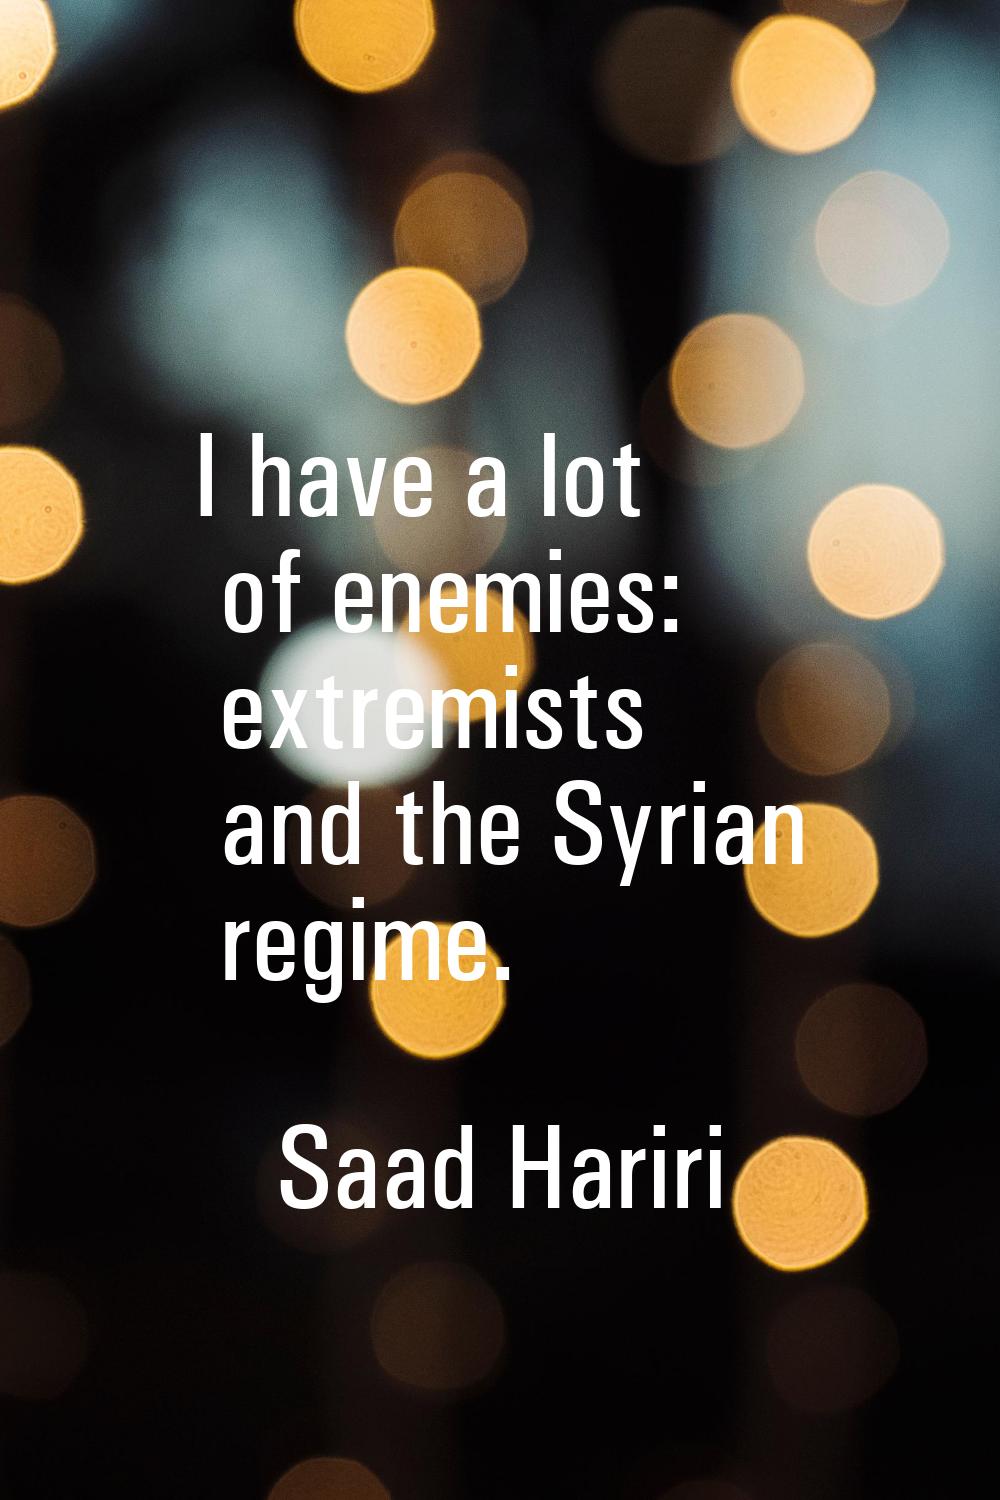 I have a lot of enemies: extremists and the Syrian regime.